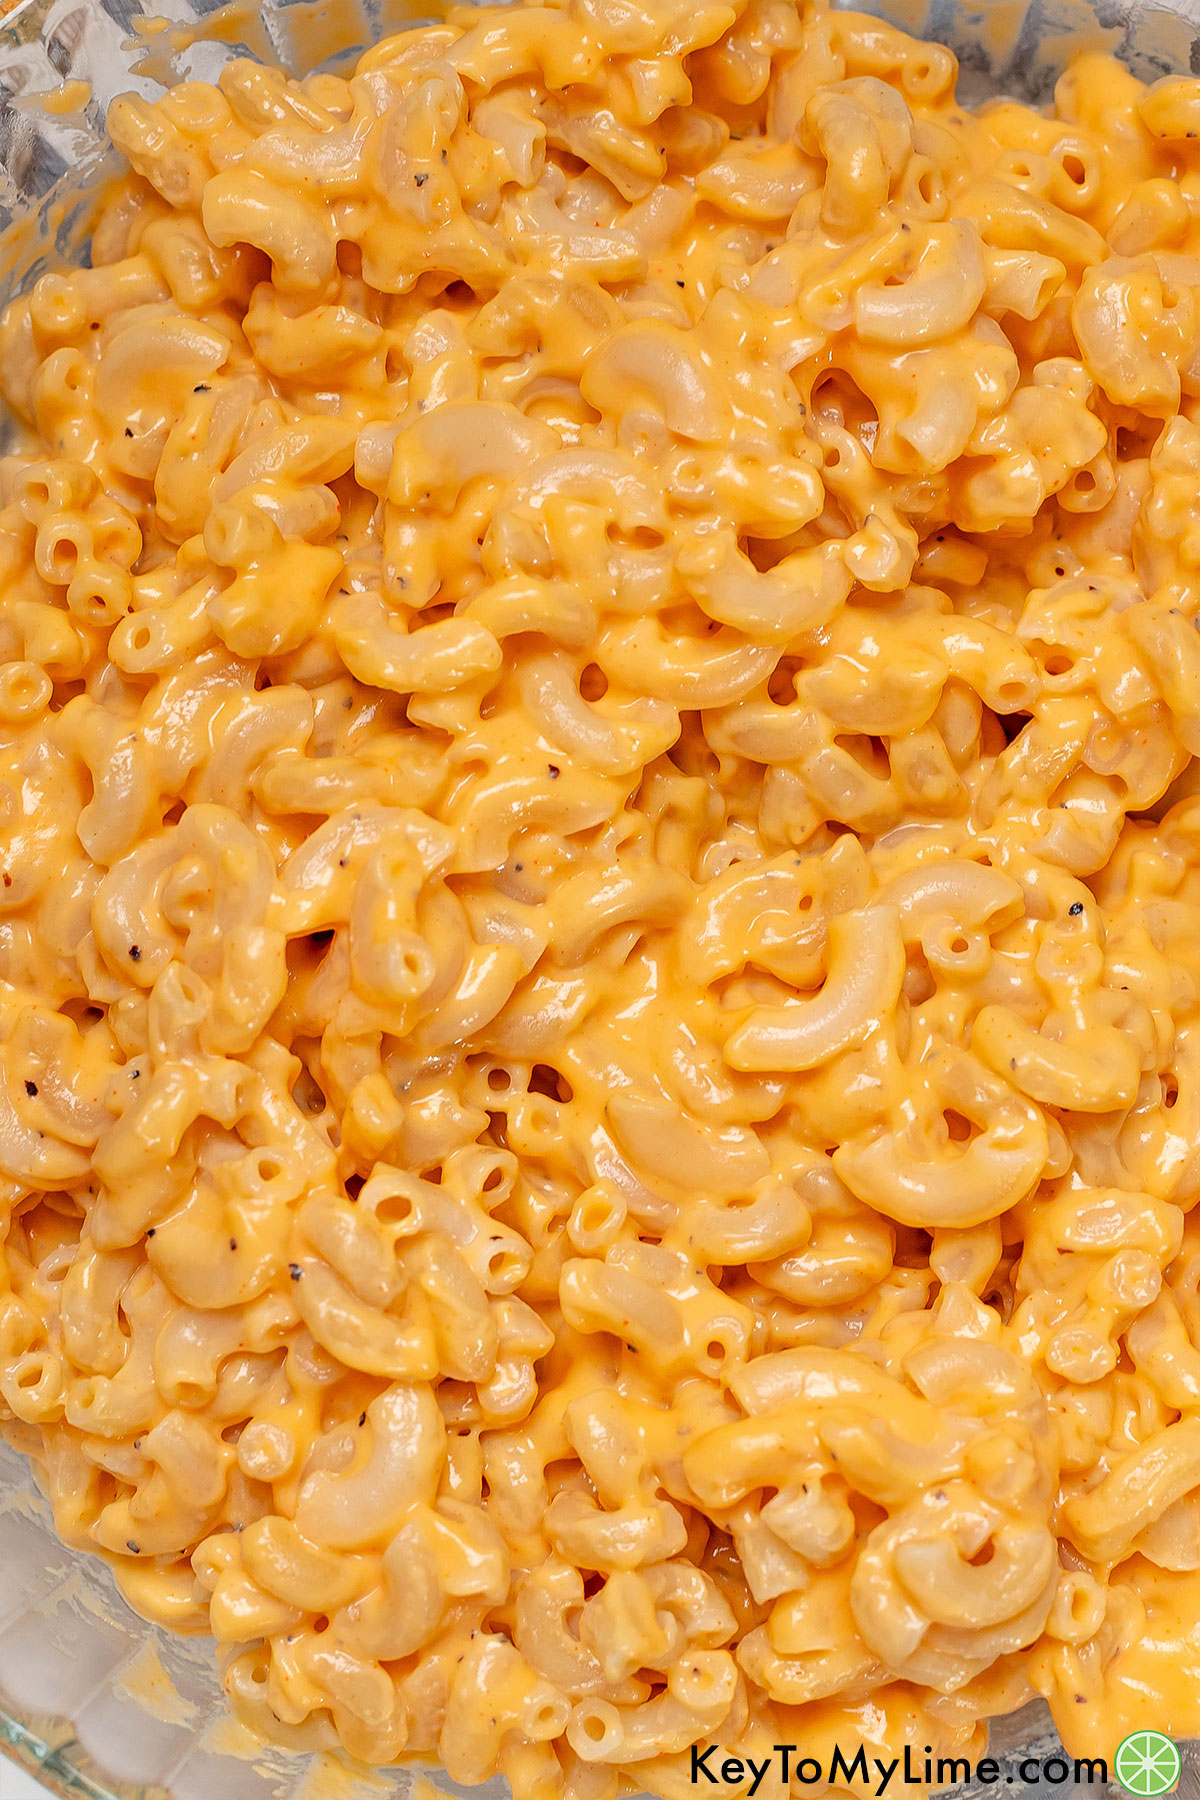 A close up image of macaroni covered in cheese sauce.